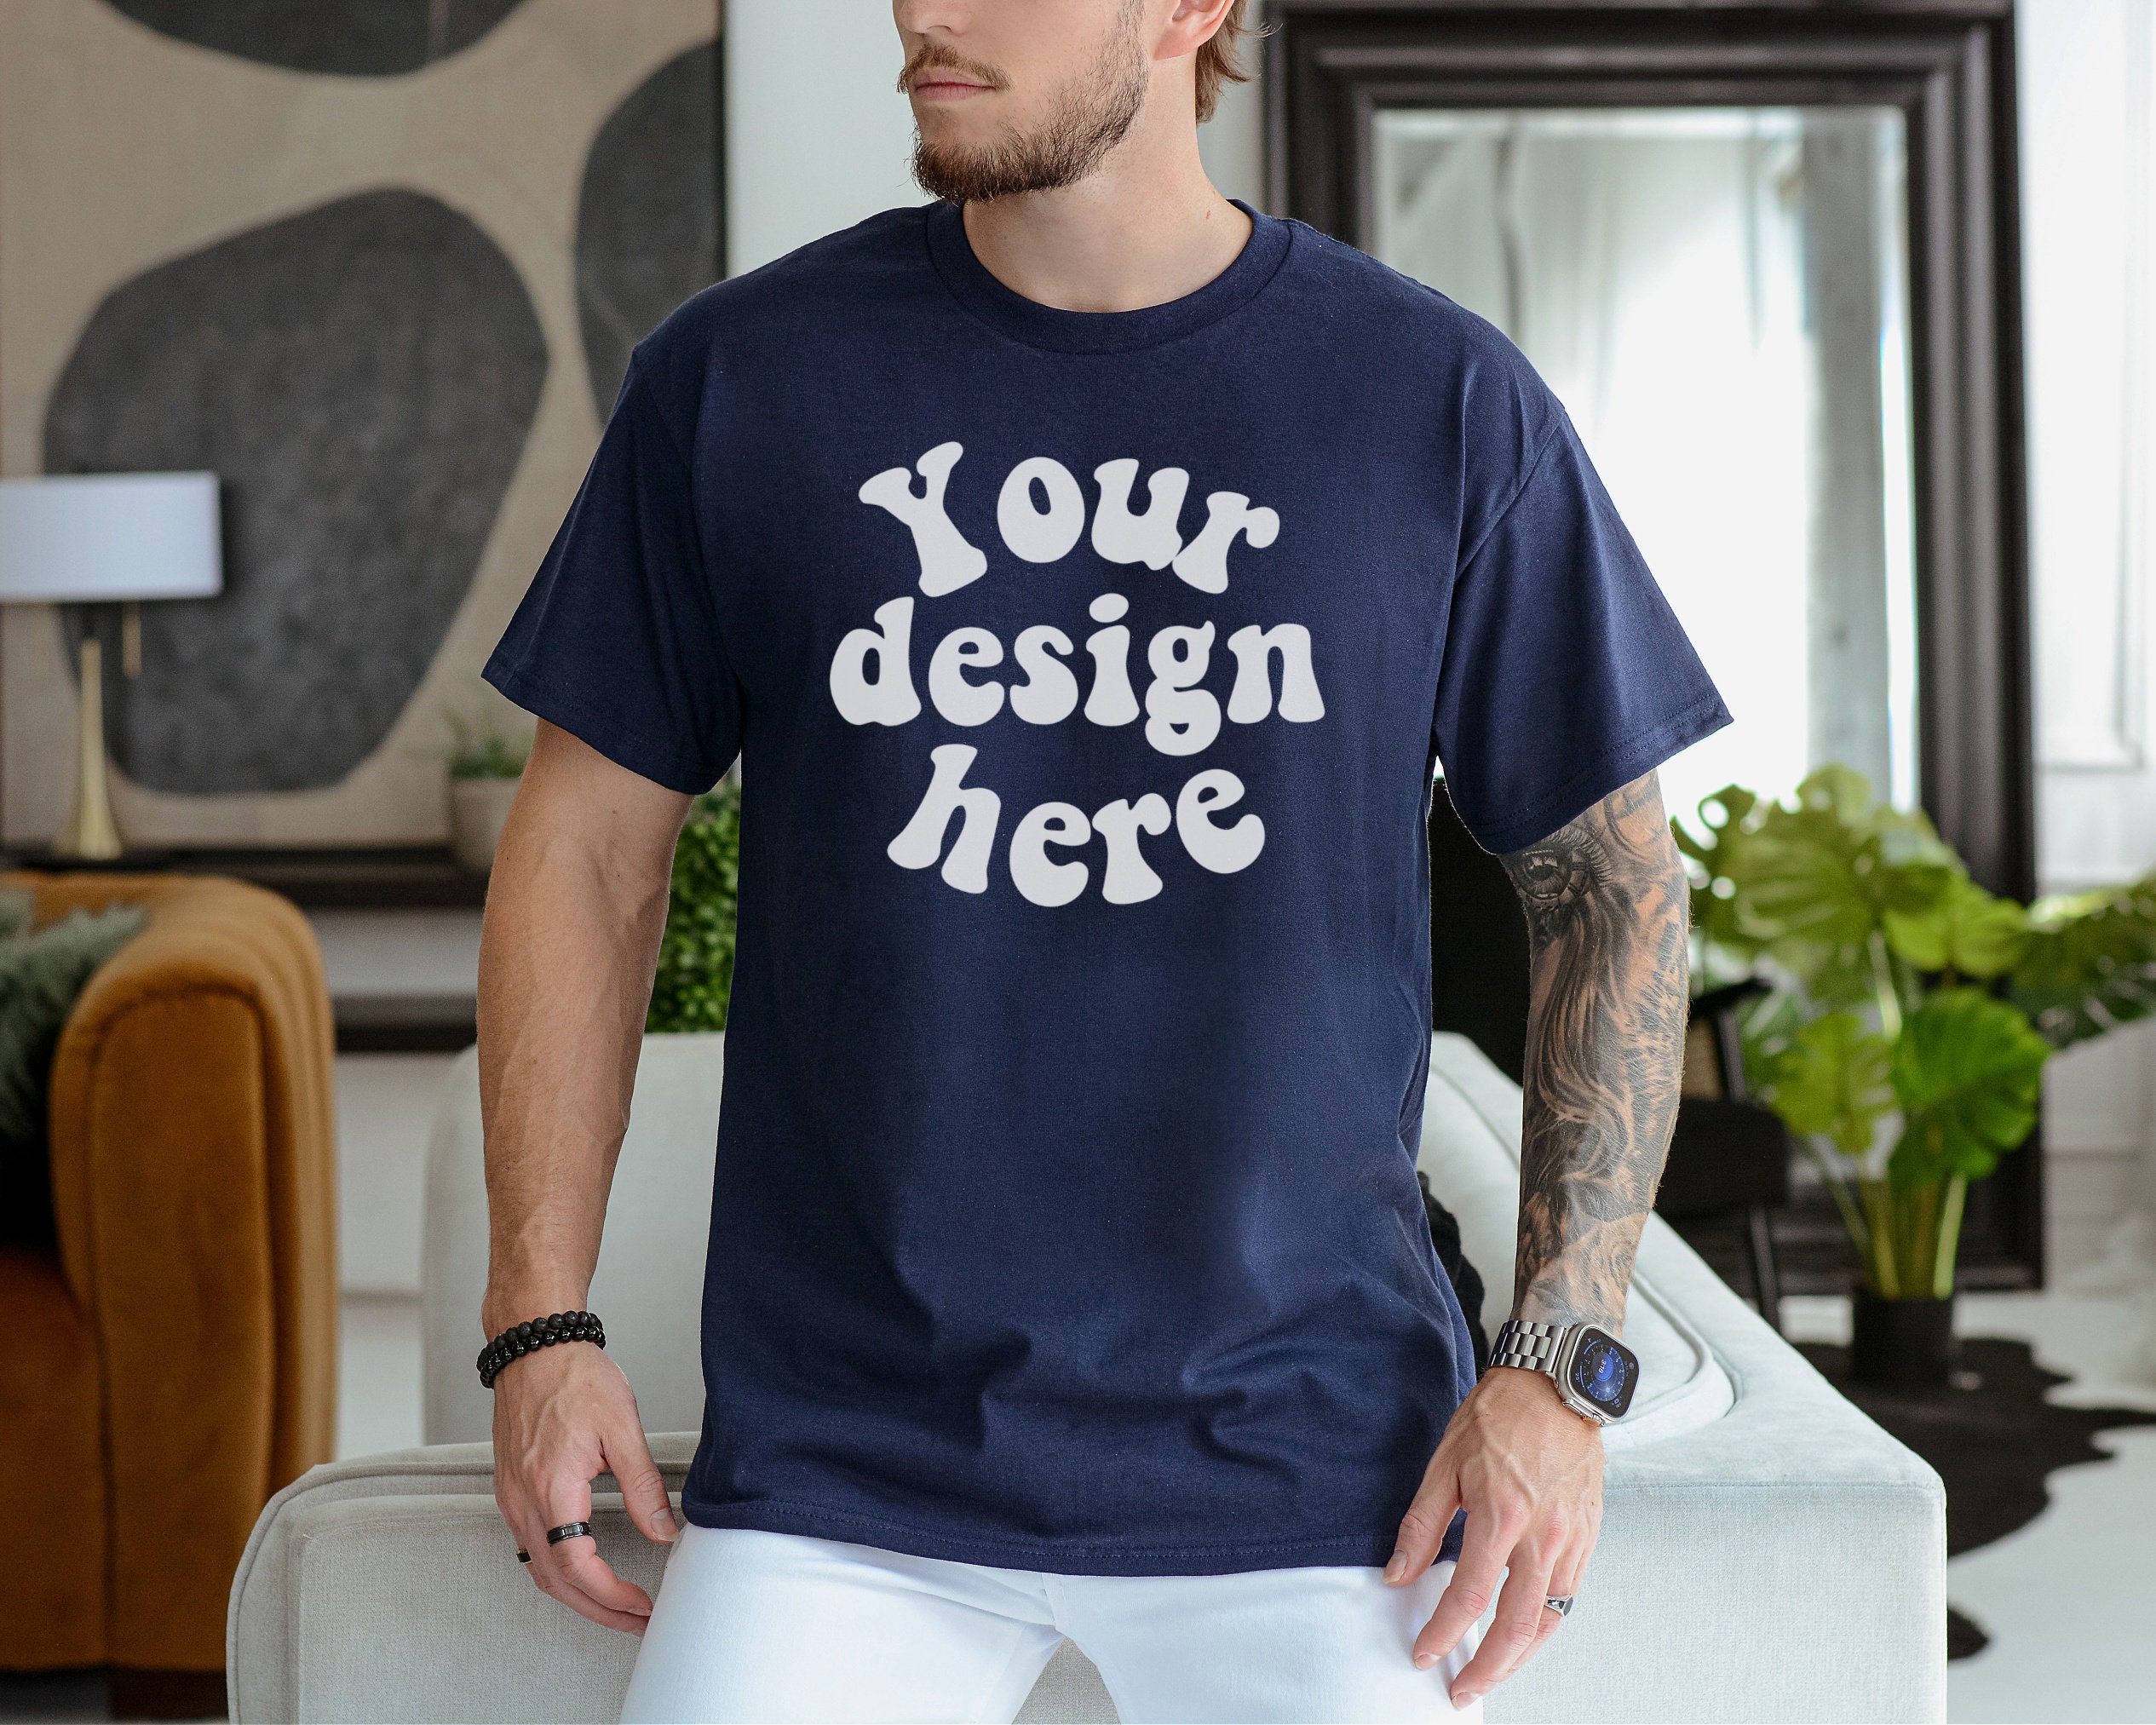 Navy Blue Glitter Simulated Look | Graphic T-Shirt